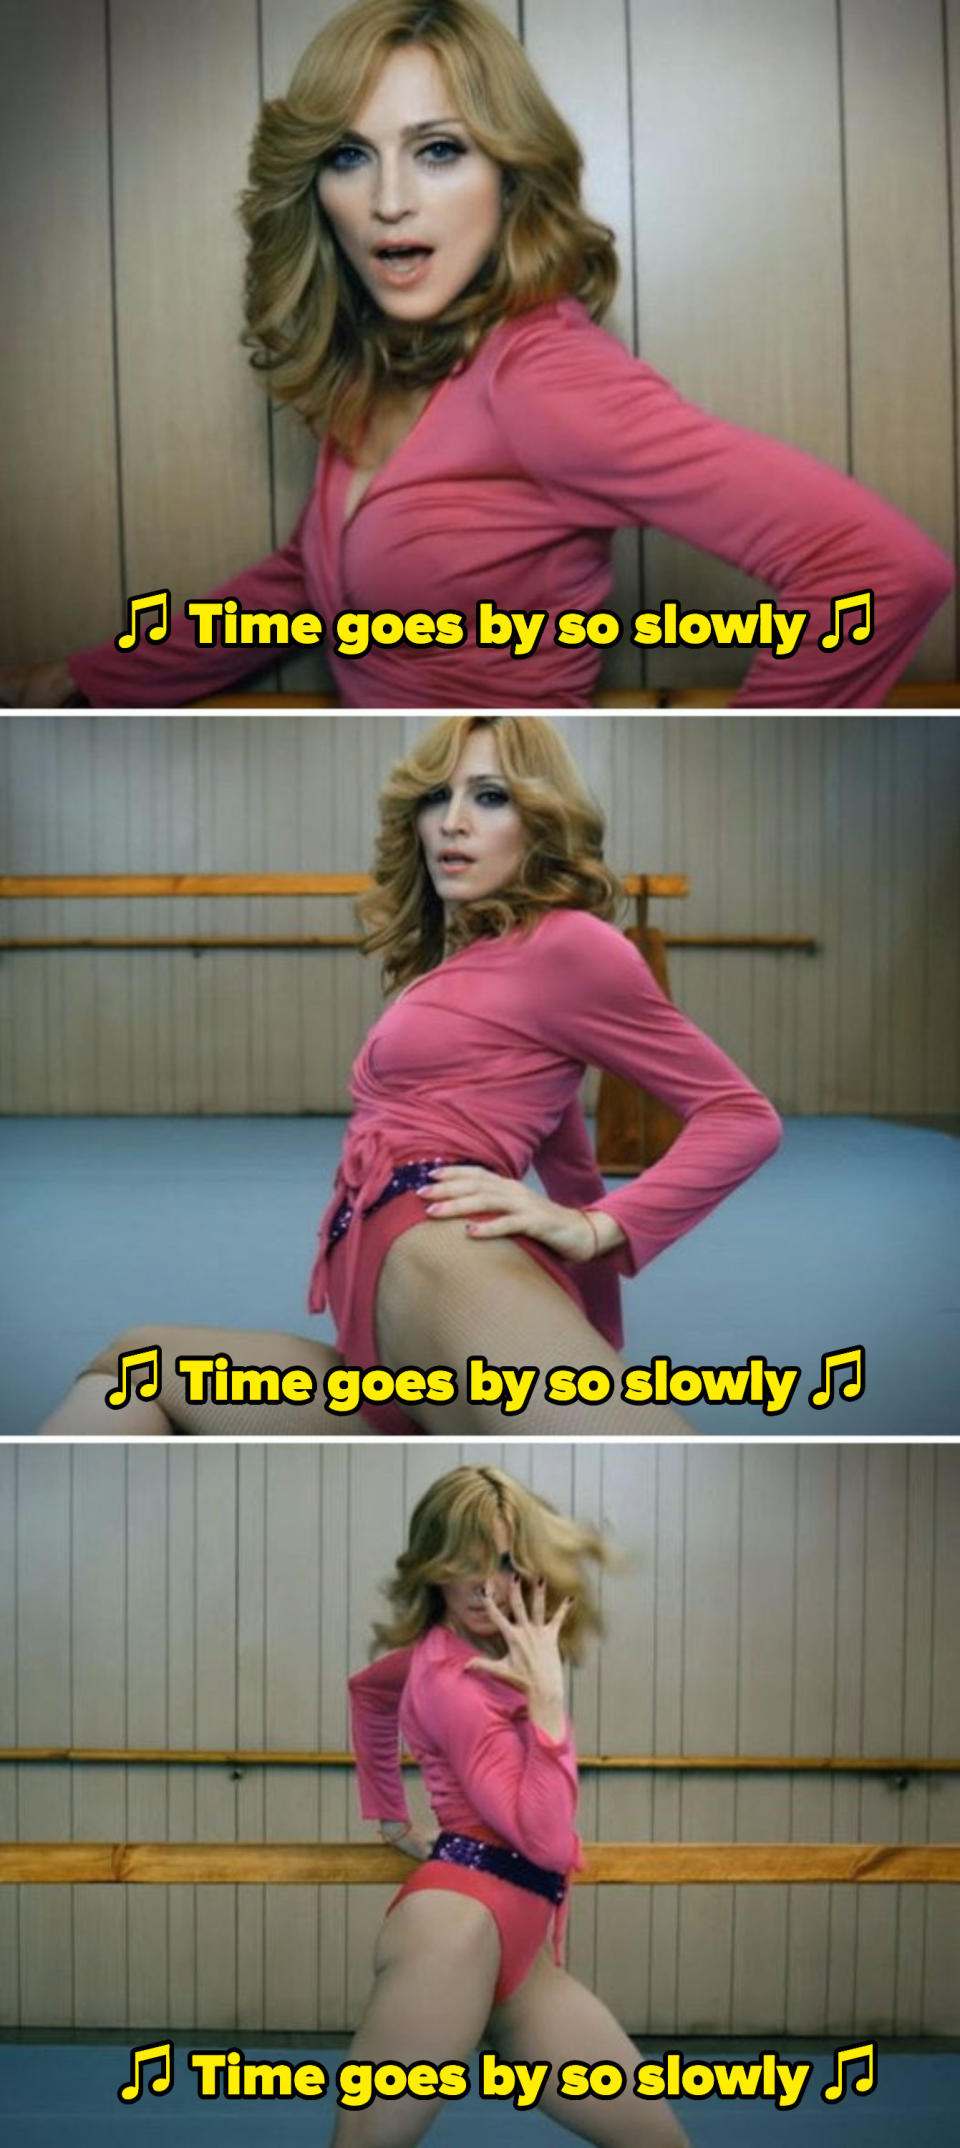 Madonna singing "Time goes by so slowly" in various dance shots in her "Hung Up" music video